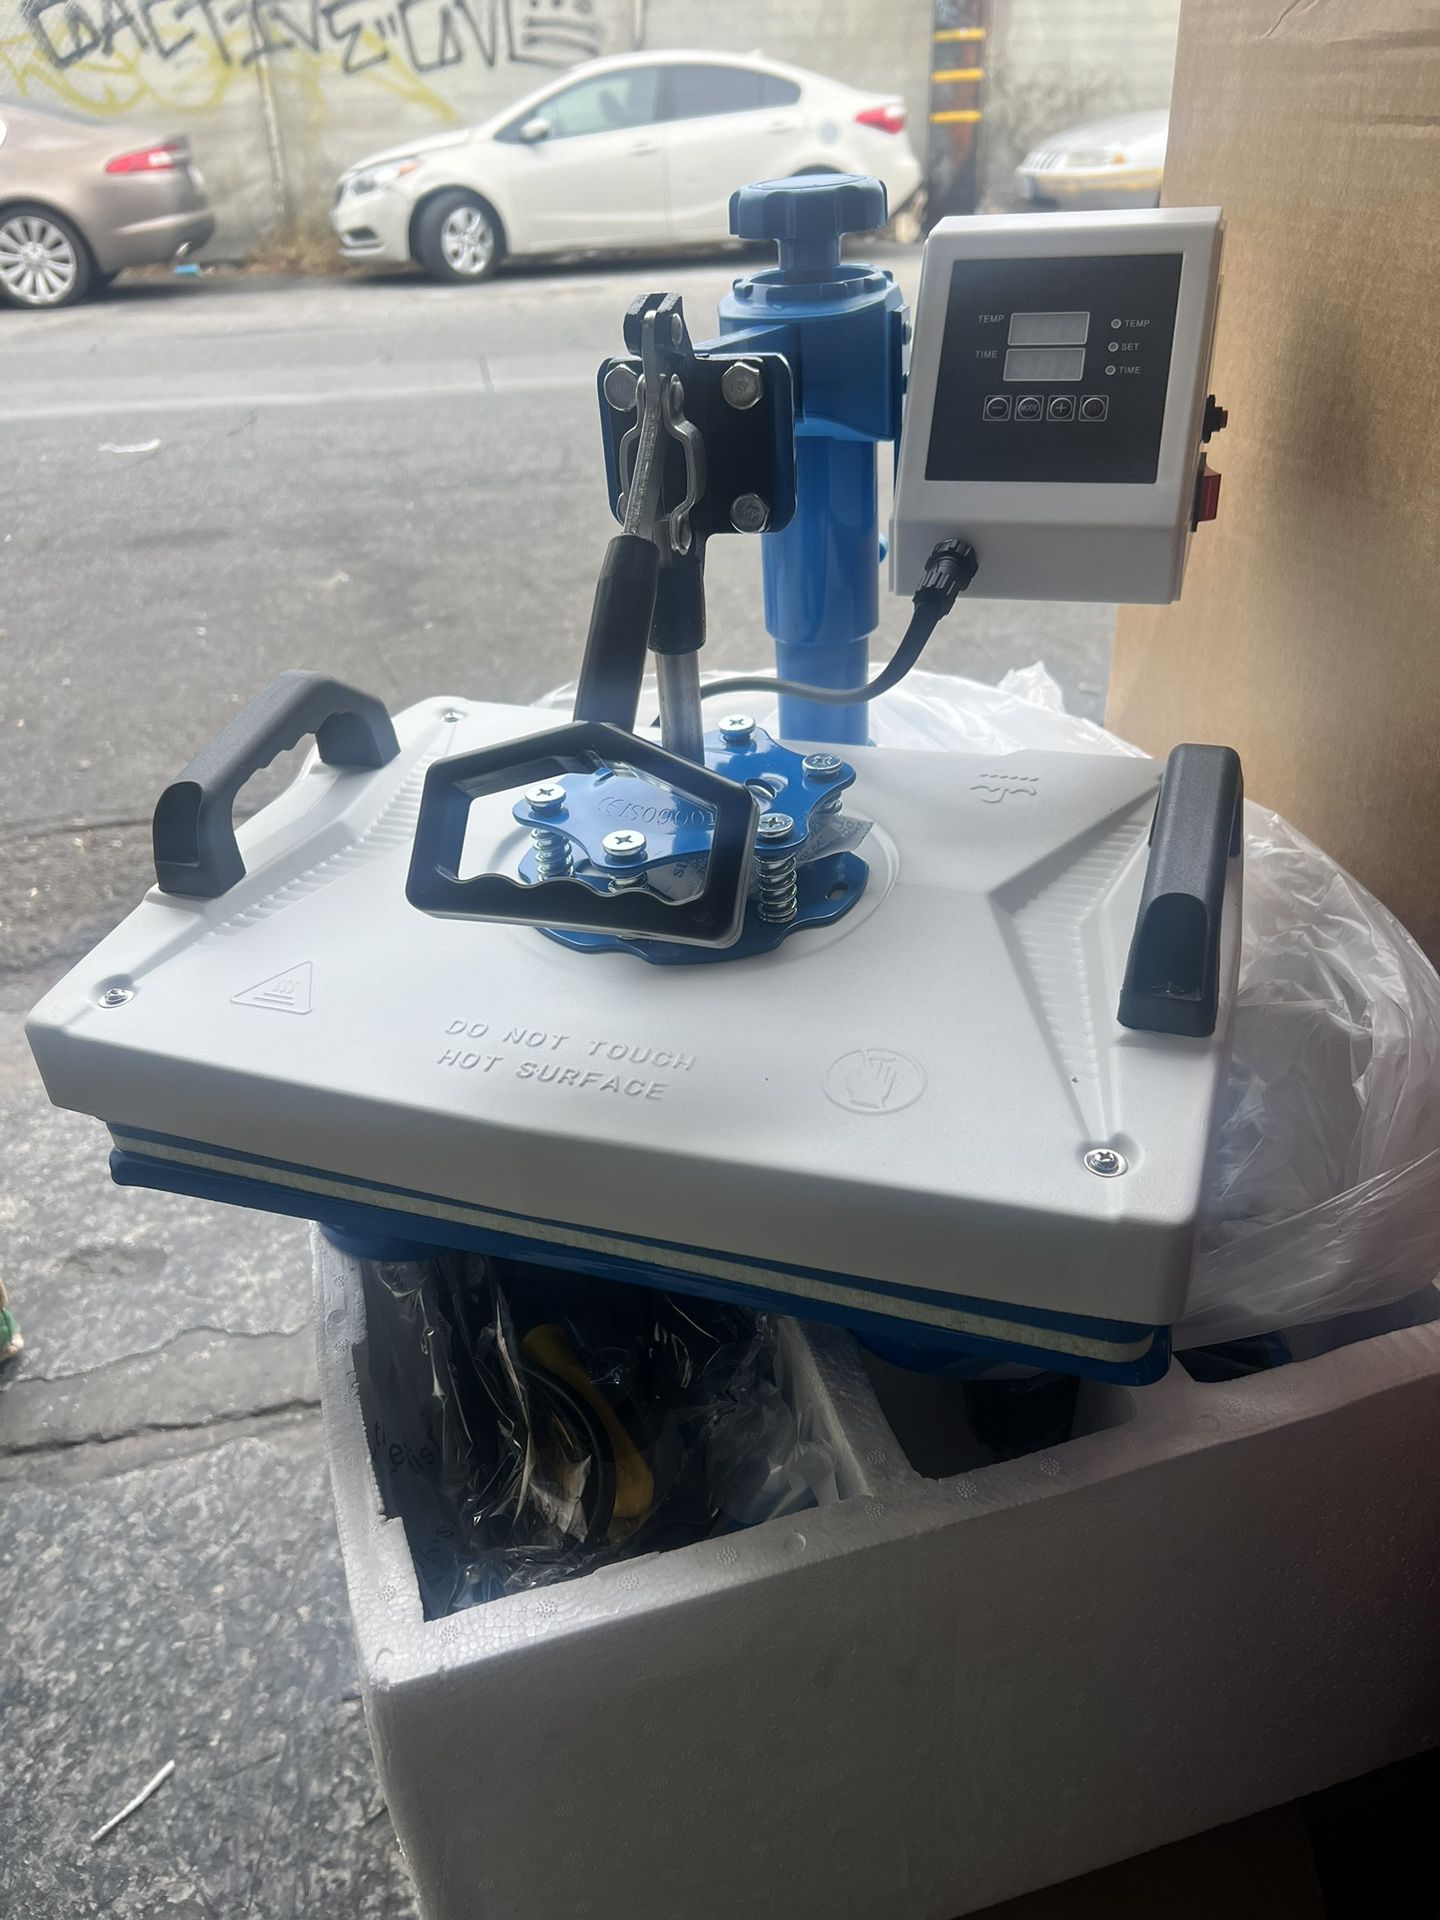 Circuit Heat press 12x10 for Sale in Fresno, CA - OfferUp